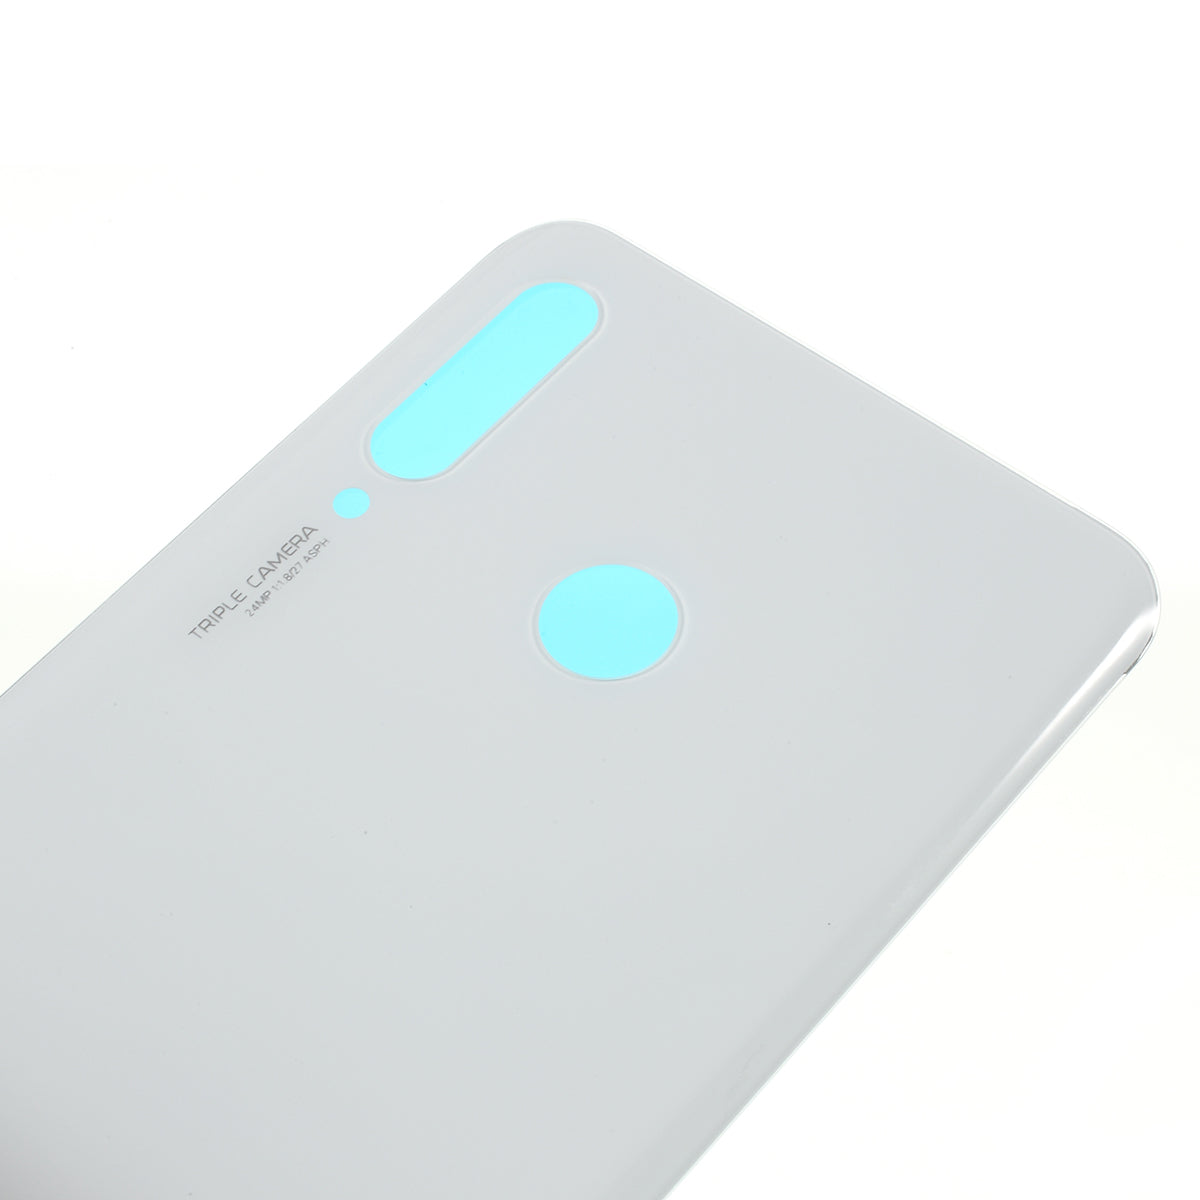 Battery Housing Door Cover Replacement for Huawei P30 Lite with 48MP Camera - White